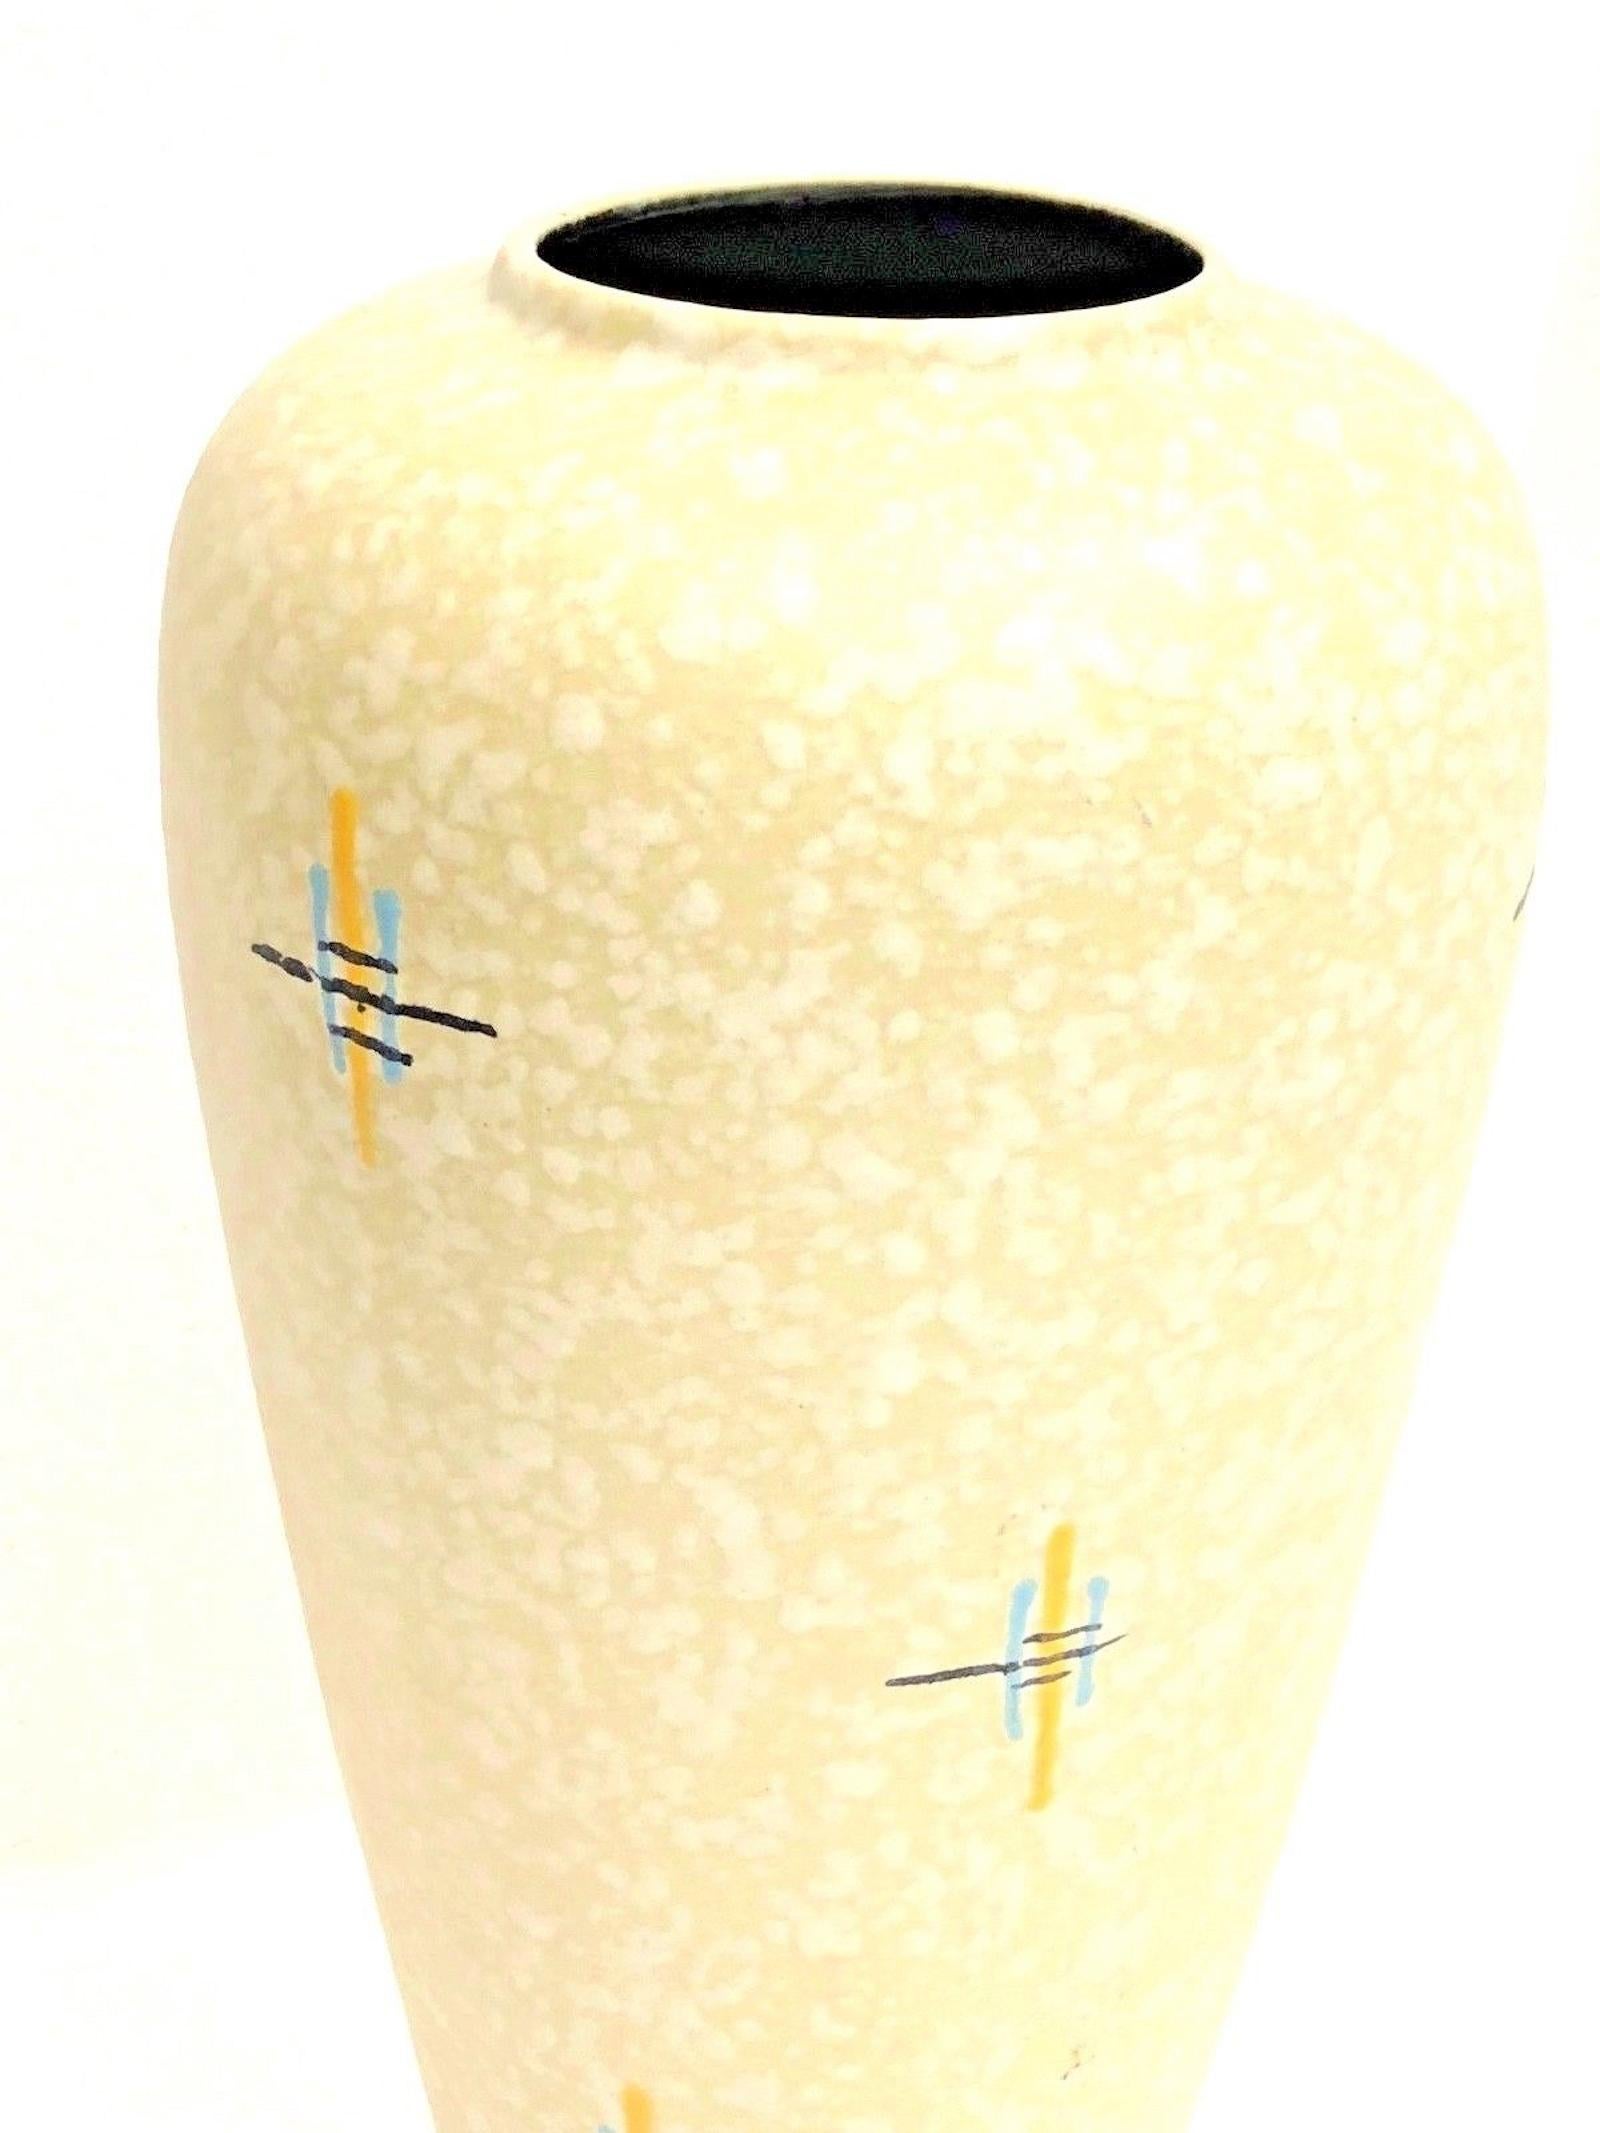 An amazing crack glazed ceramic Mid-Century Modern floor vase made in Germany, circa 1950s. This is a heavy floor vase but you can also use it as a umbrella stand. Vase is in very good condition with no chips, cracks, or flea bites. Made by